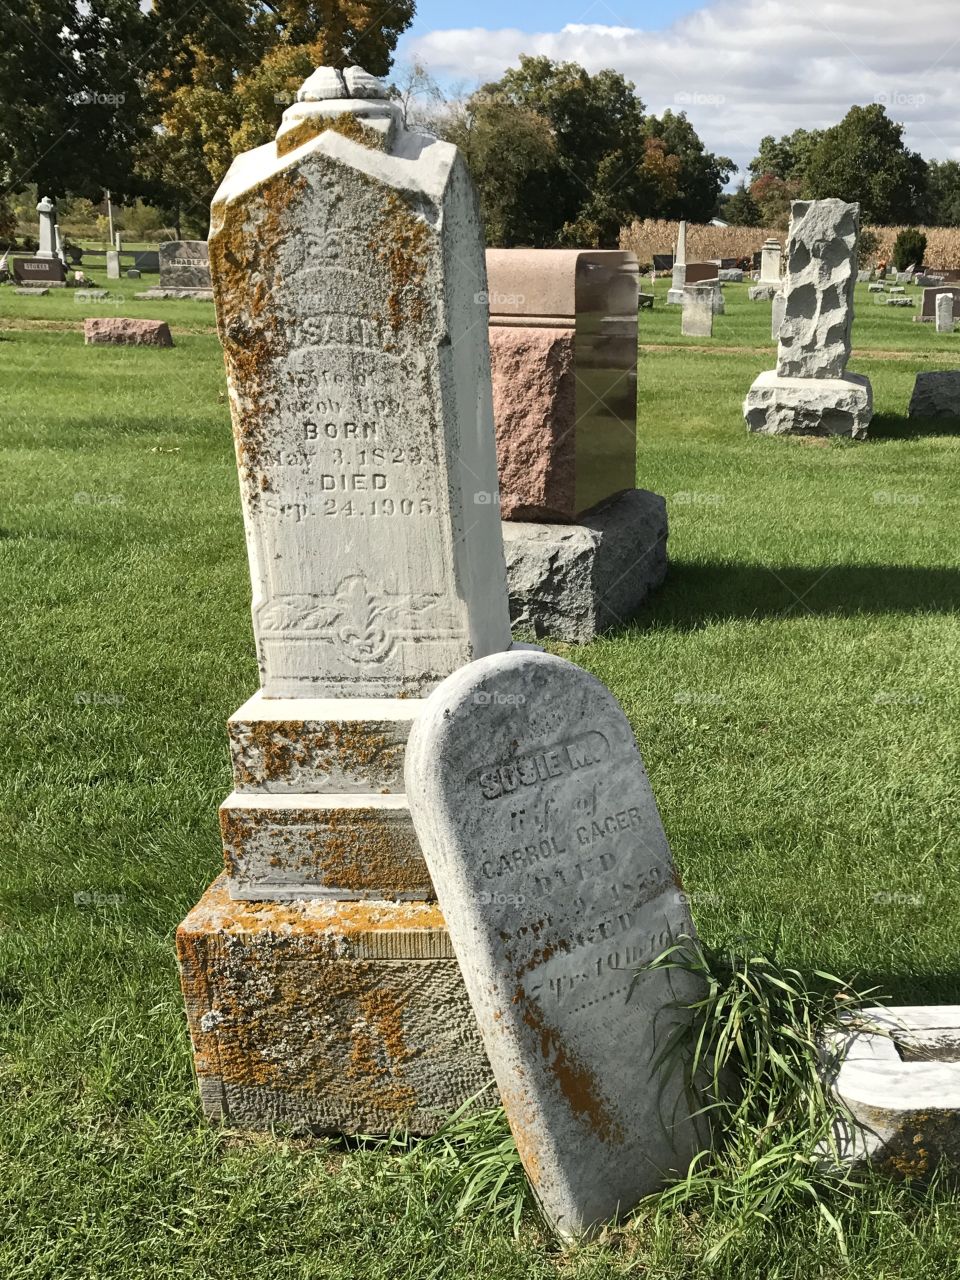 A monument with a broken headstone leaning against it